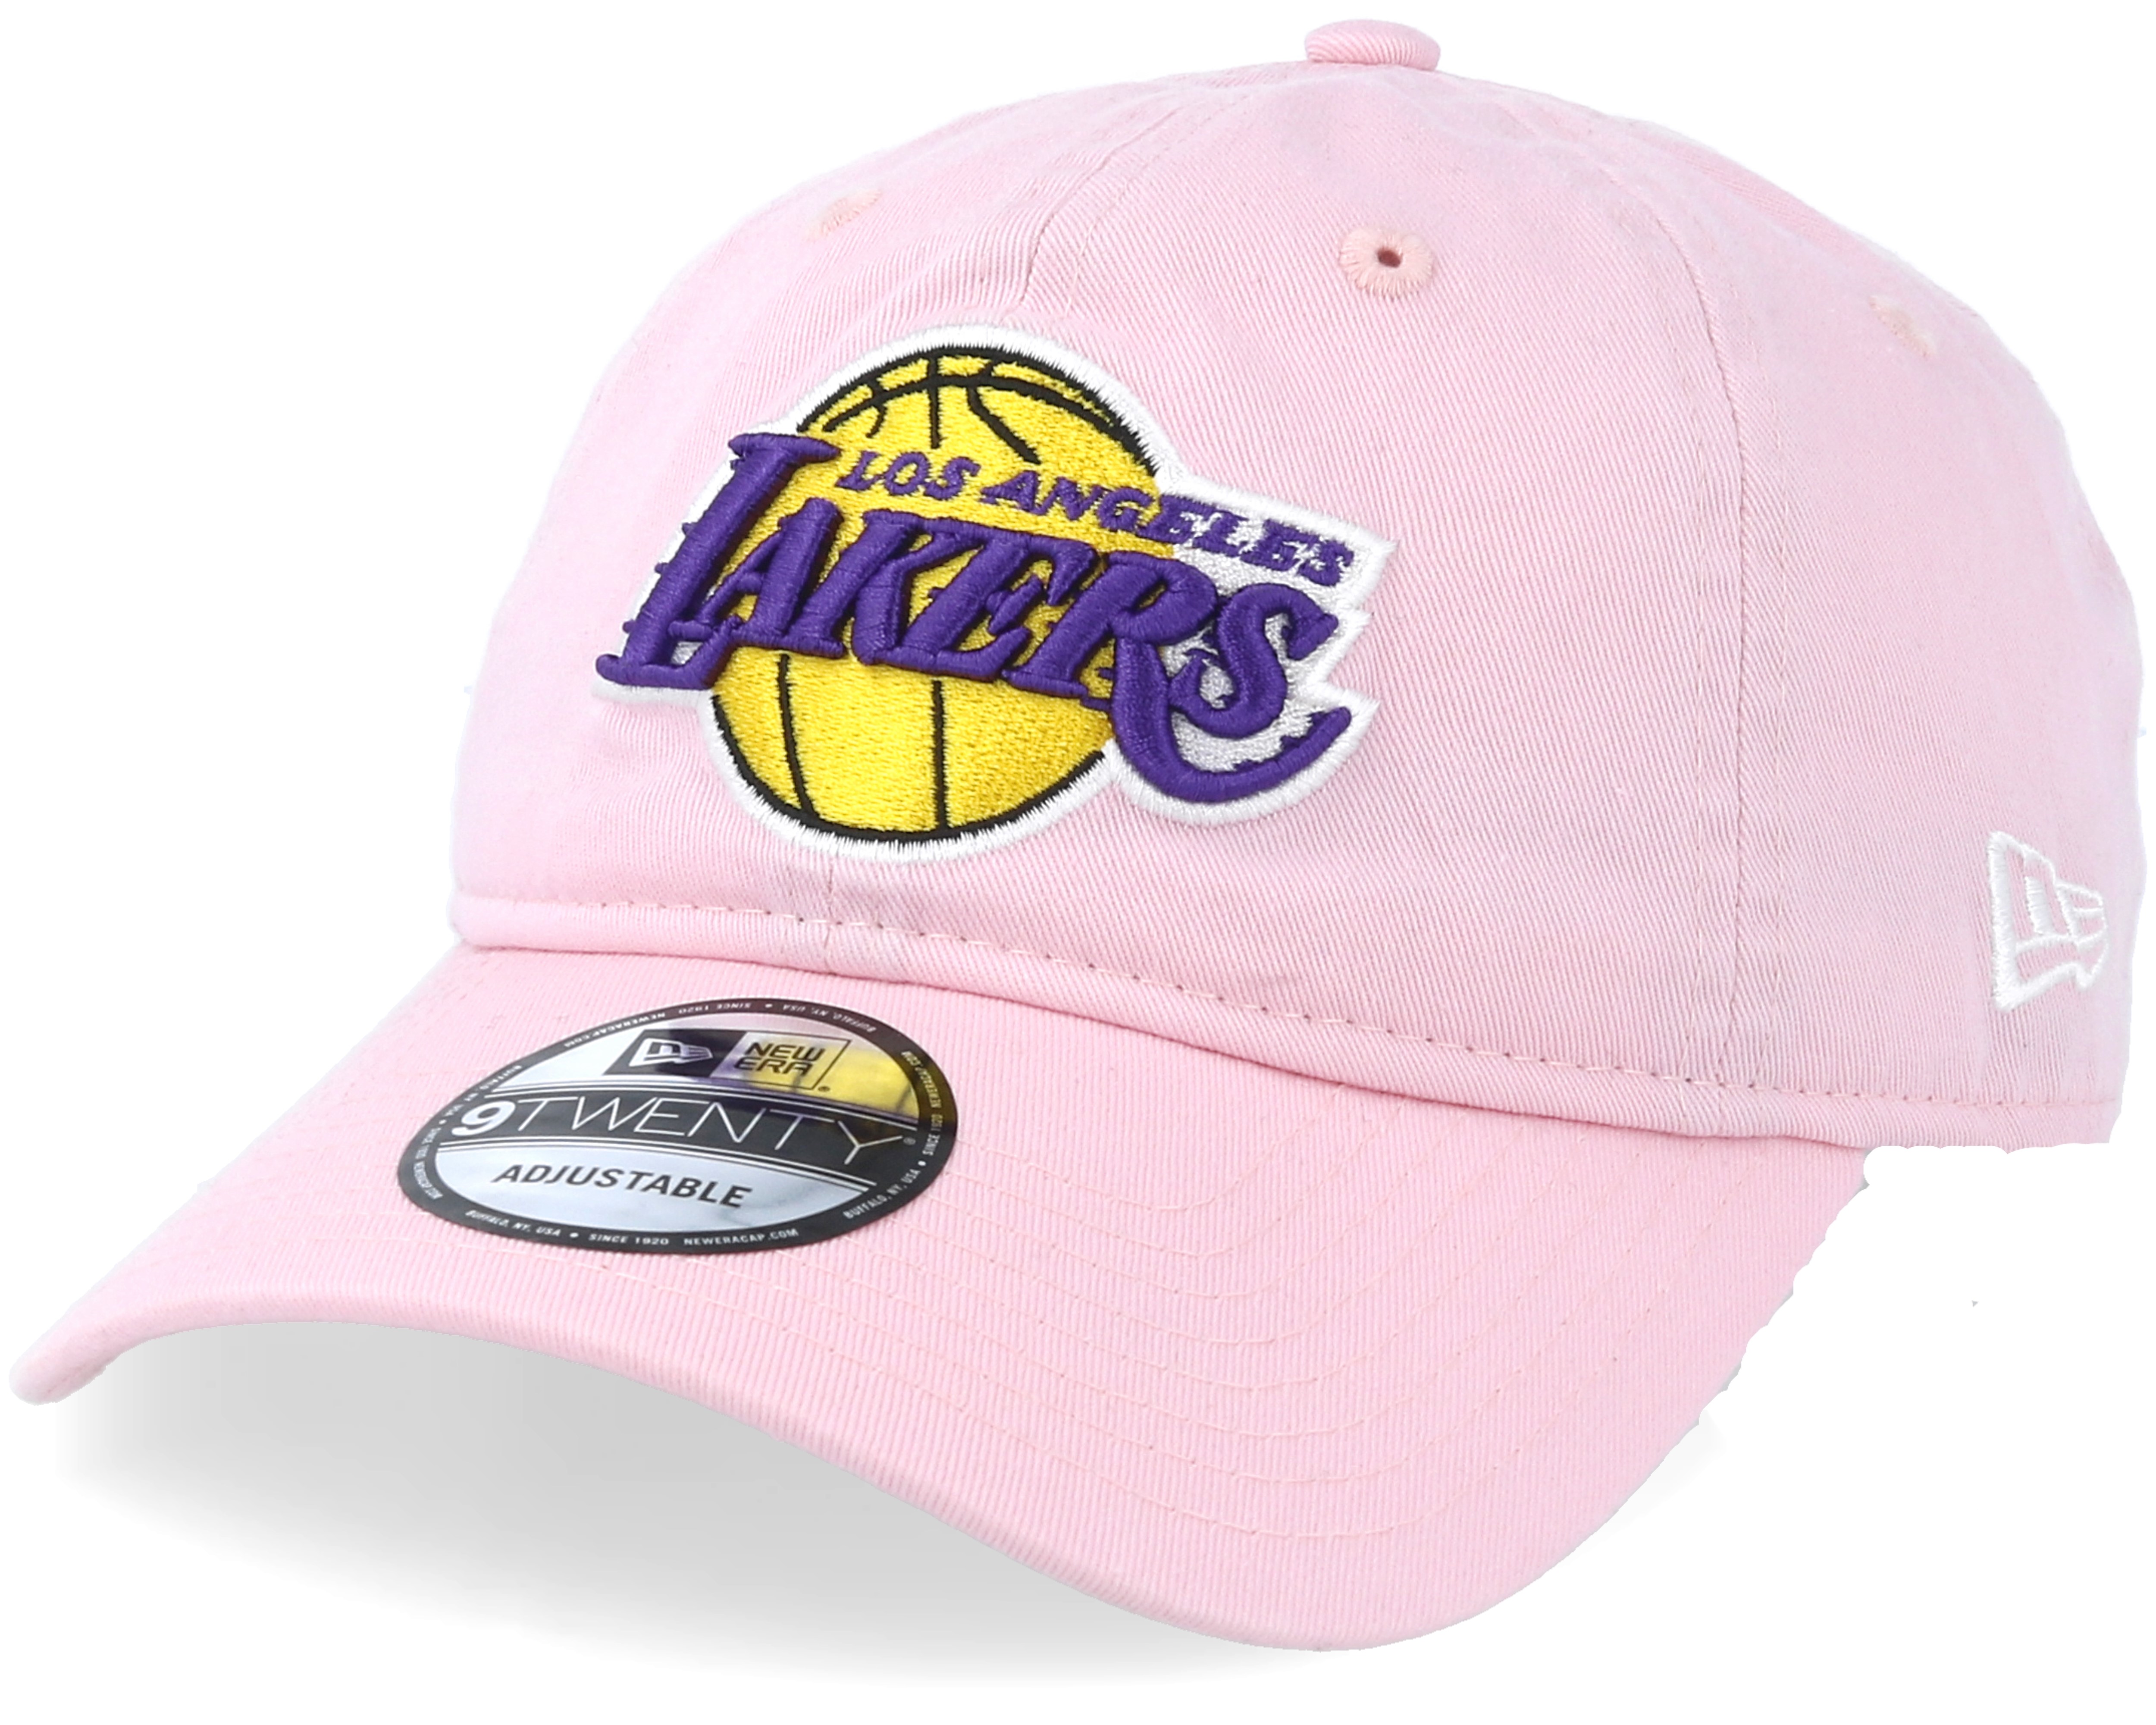 pink lakers hat